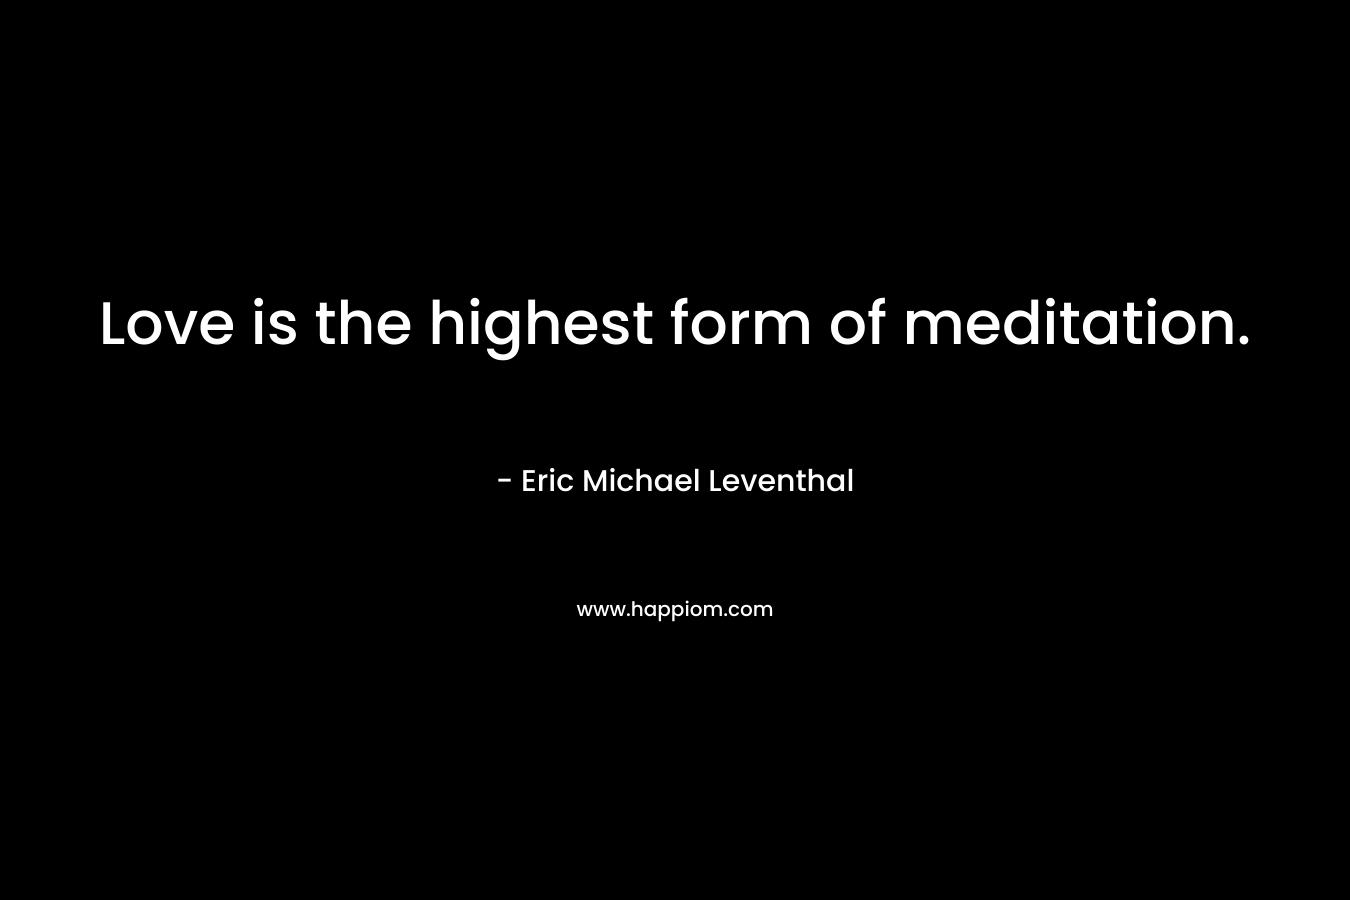 Love is the highest form of meditation.